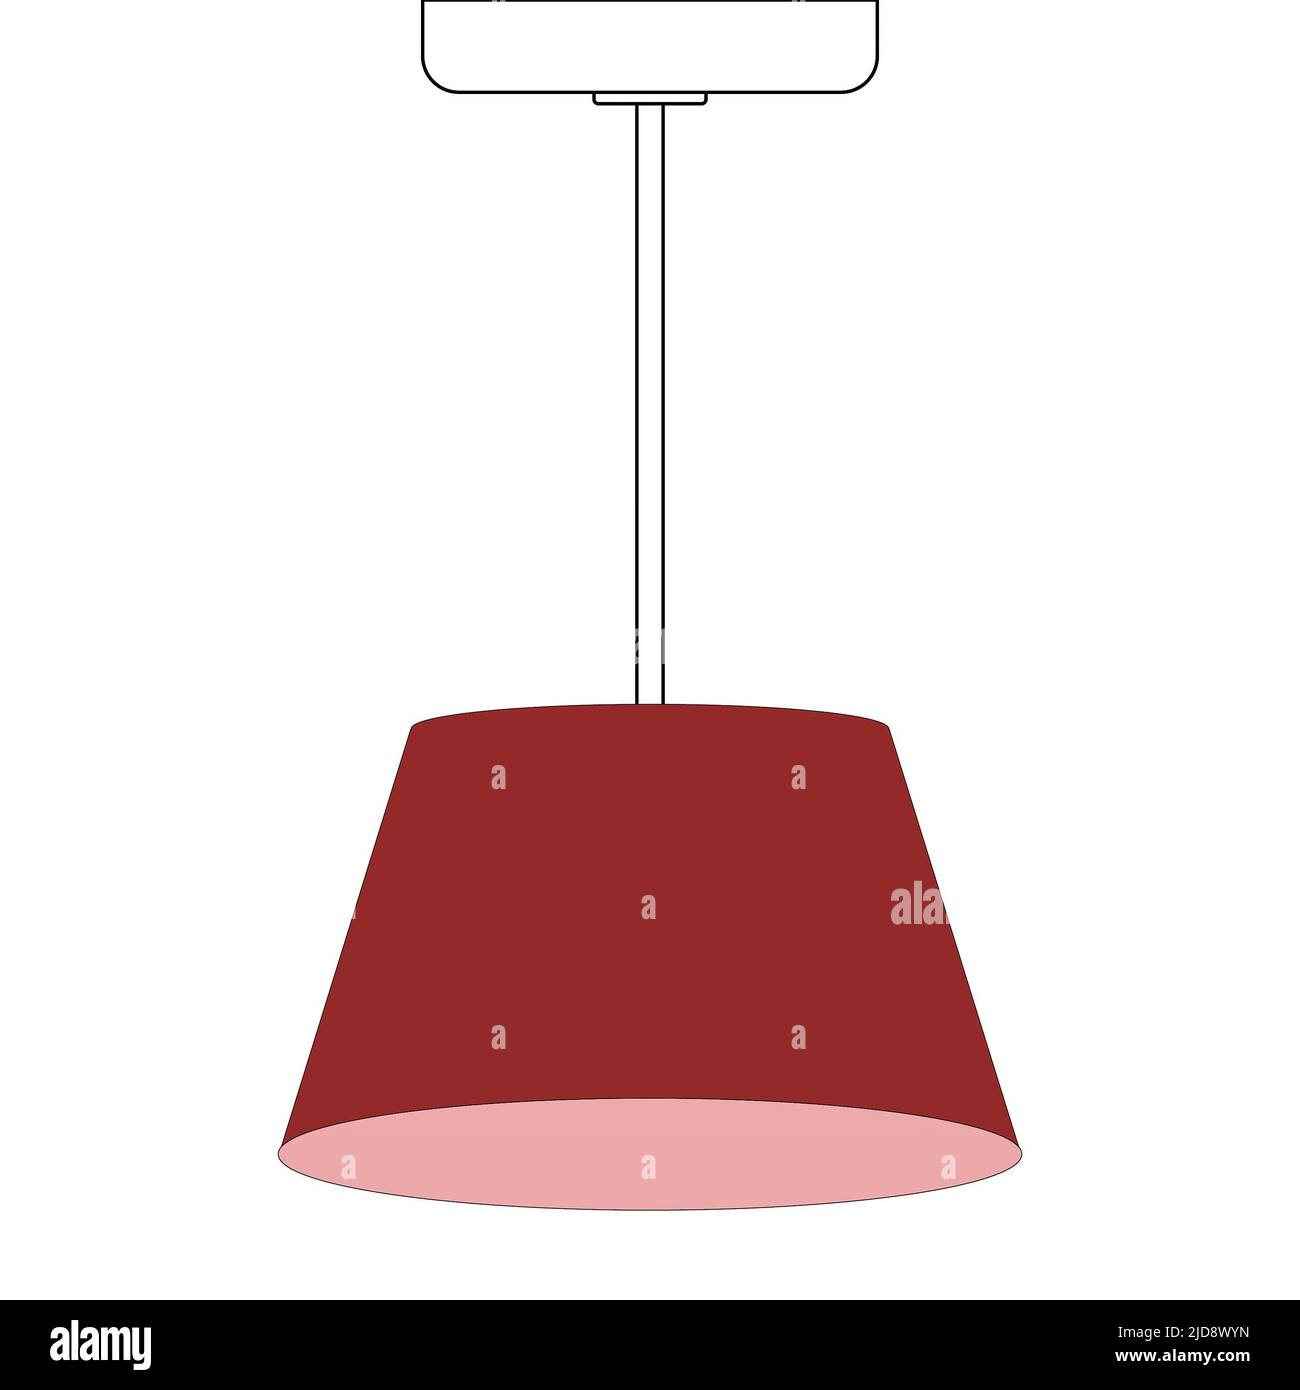 A graphic illustration of A Ceiling lamp for use as an icon or logo Stock Photo